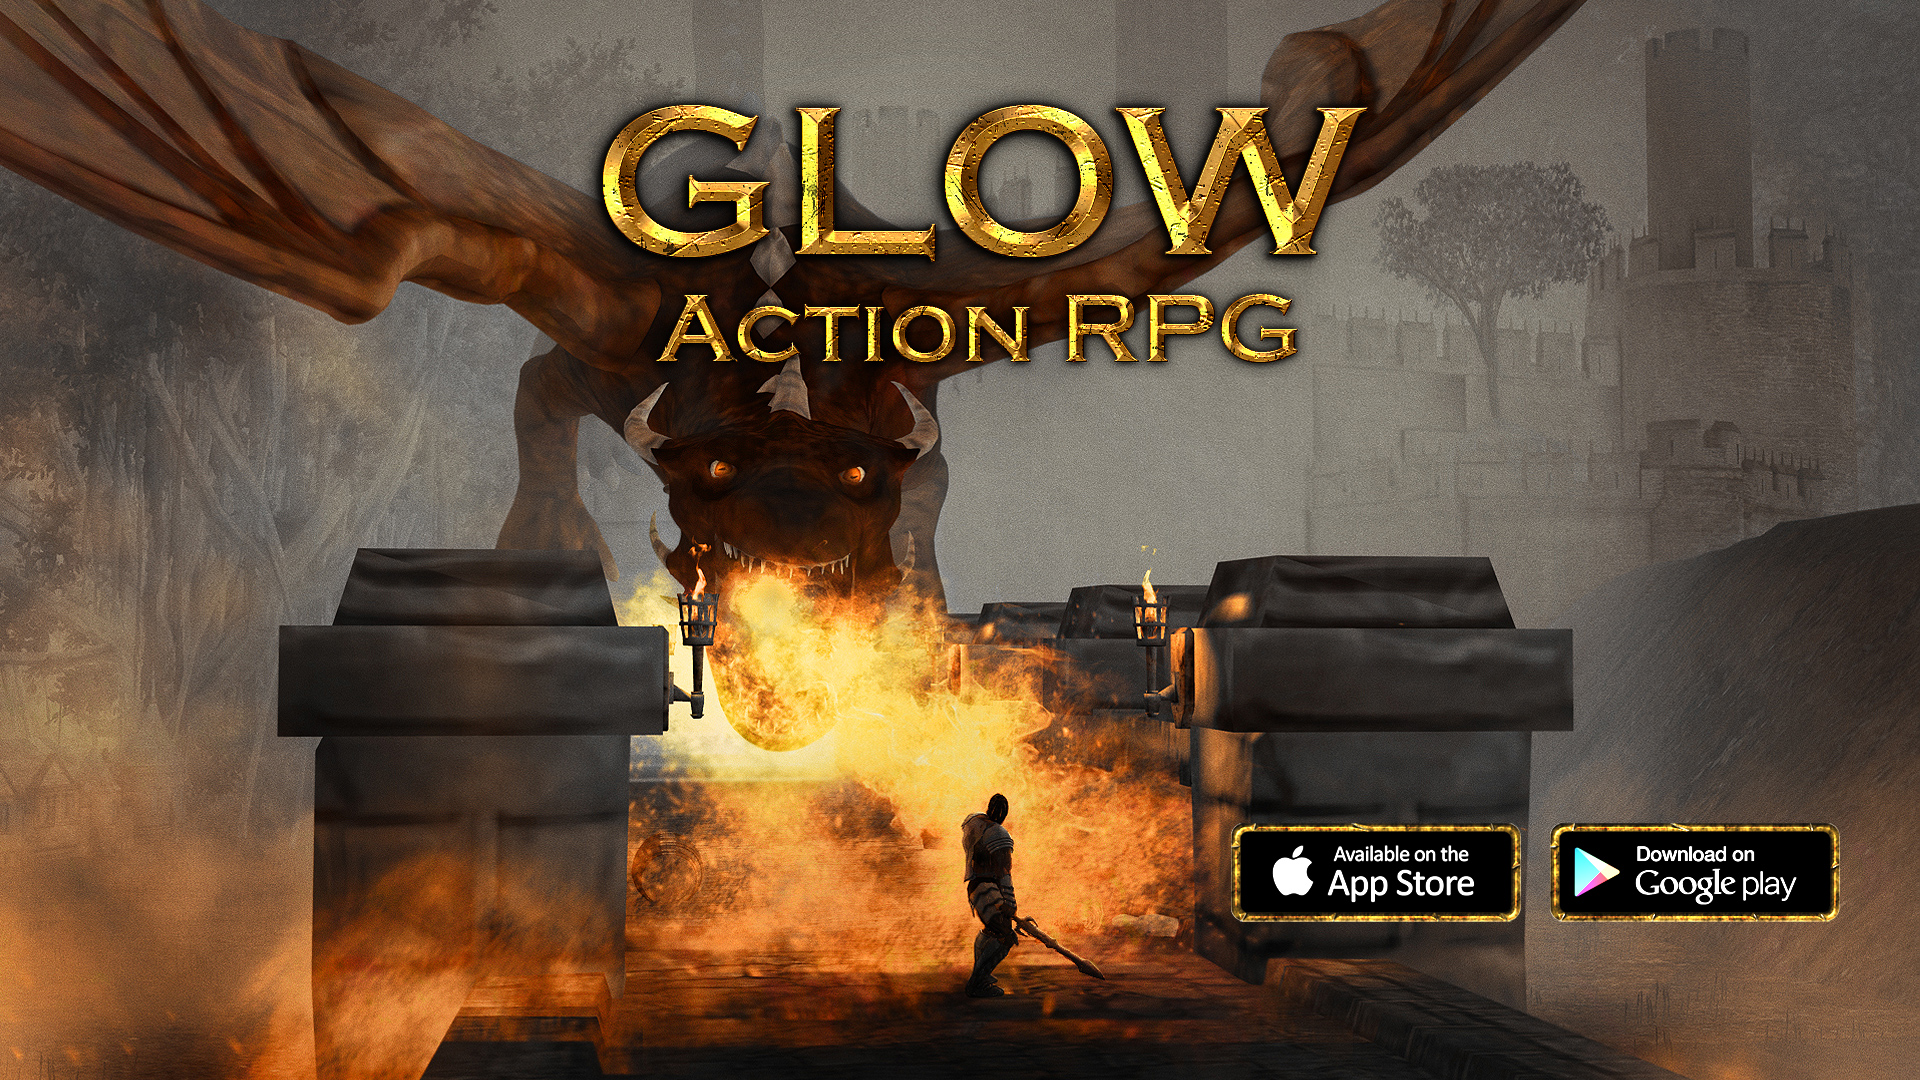 Guardian Light Of The World Mobile Action Rpg Game Ios Android